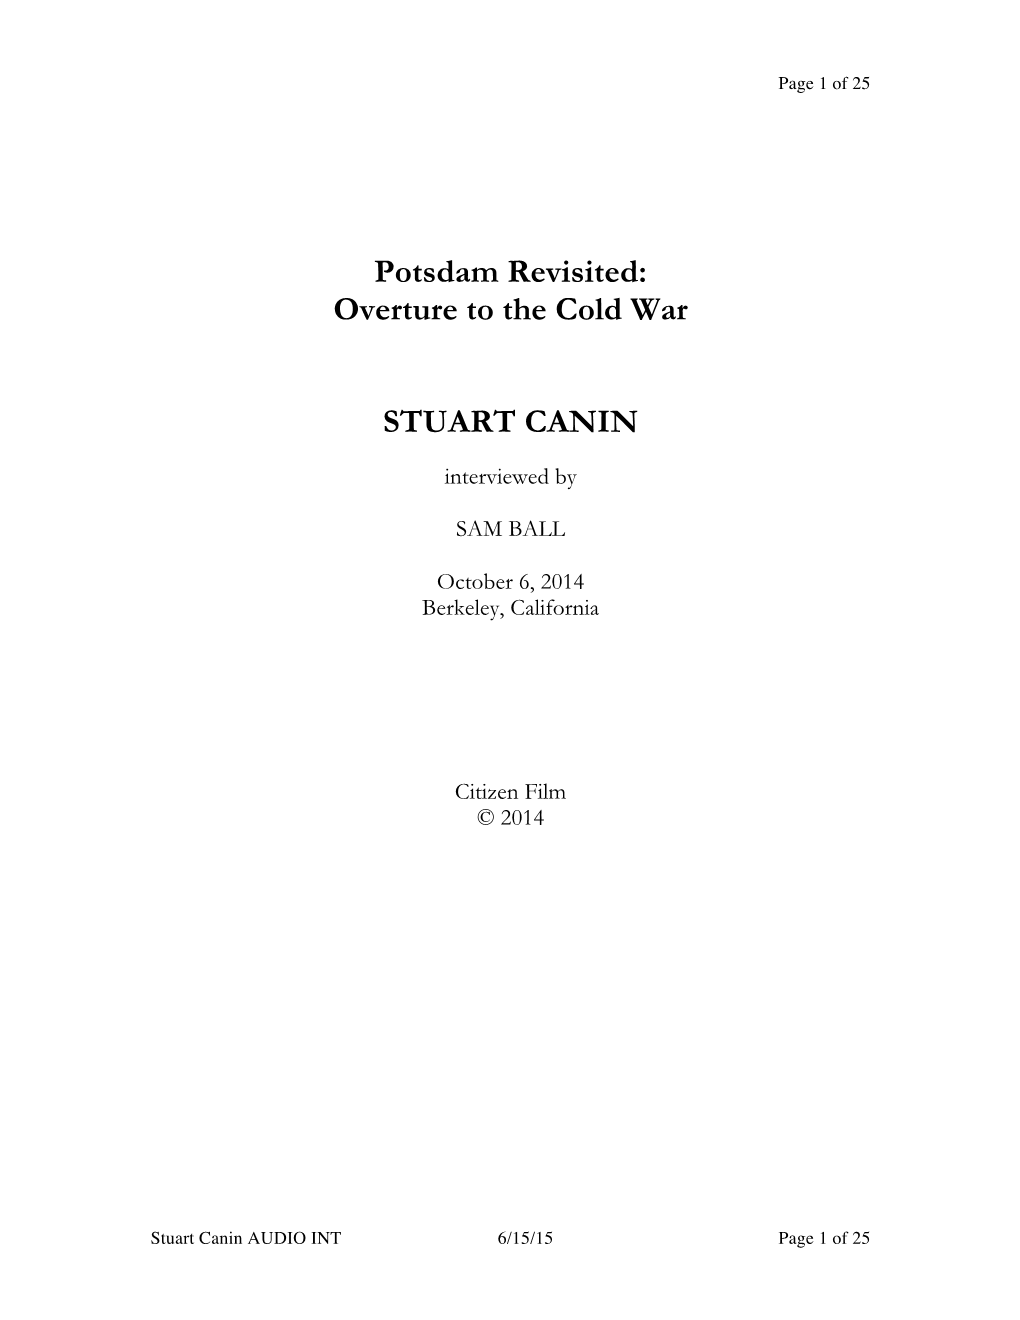 Overture to the Cold War STUART CANIN